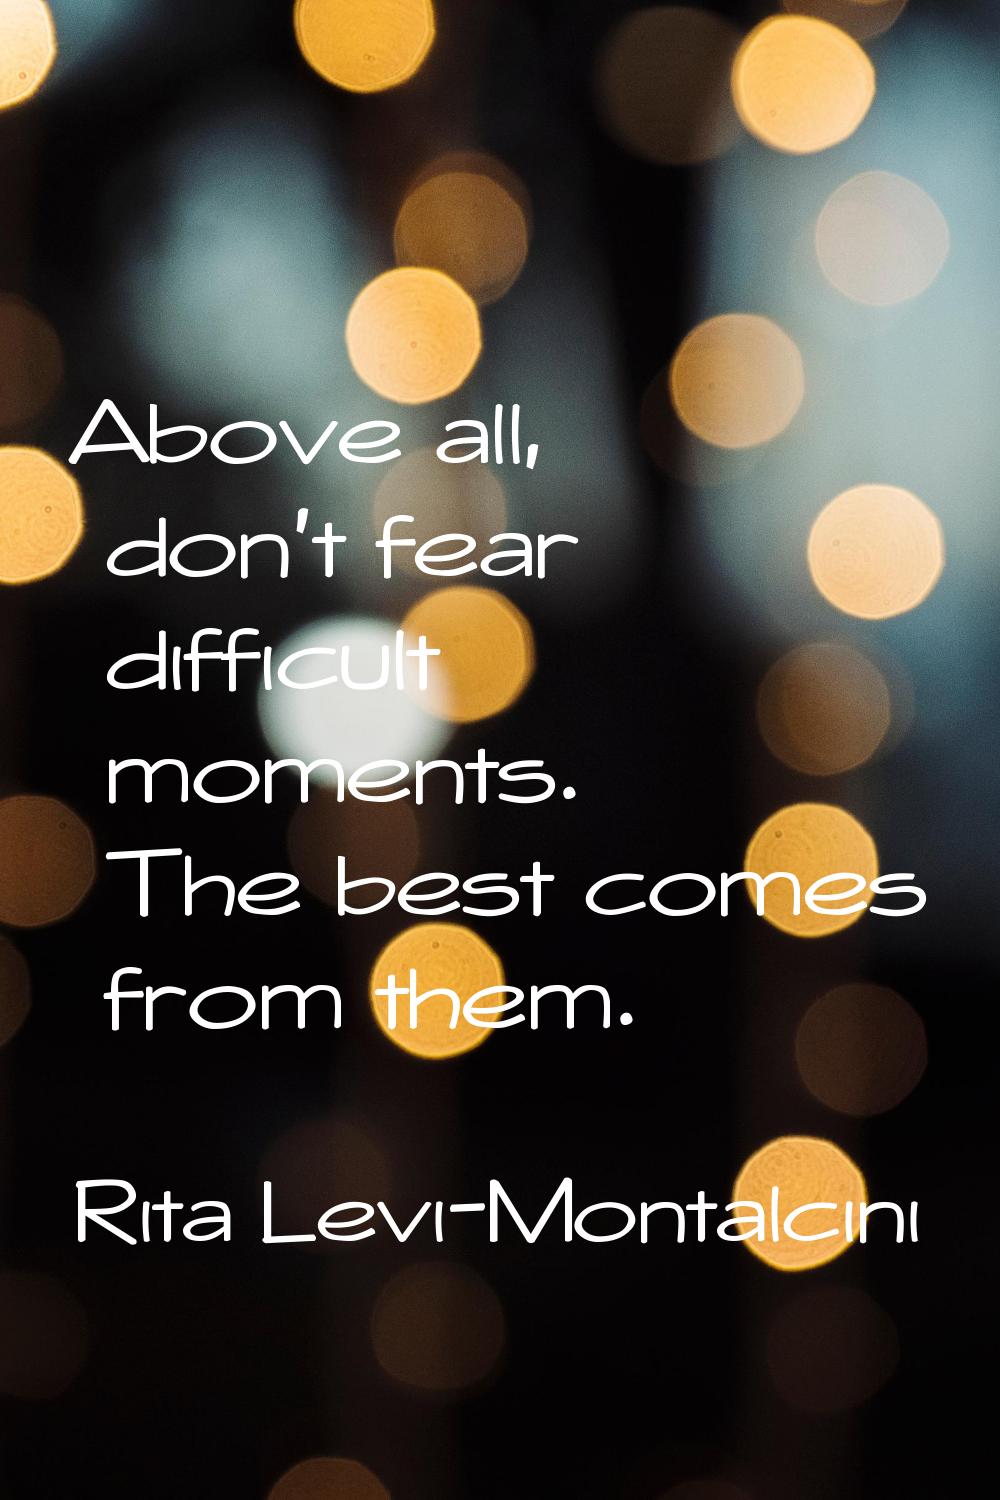 Above all, don't fear difficult moments. The best comes from them.